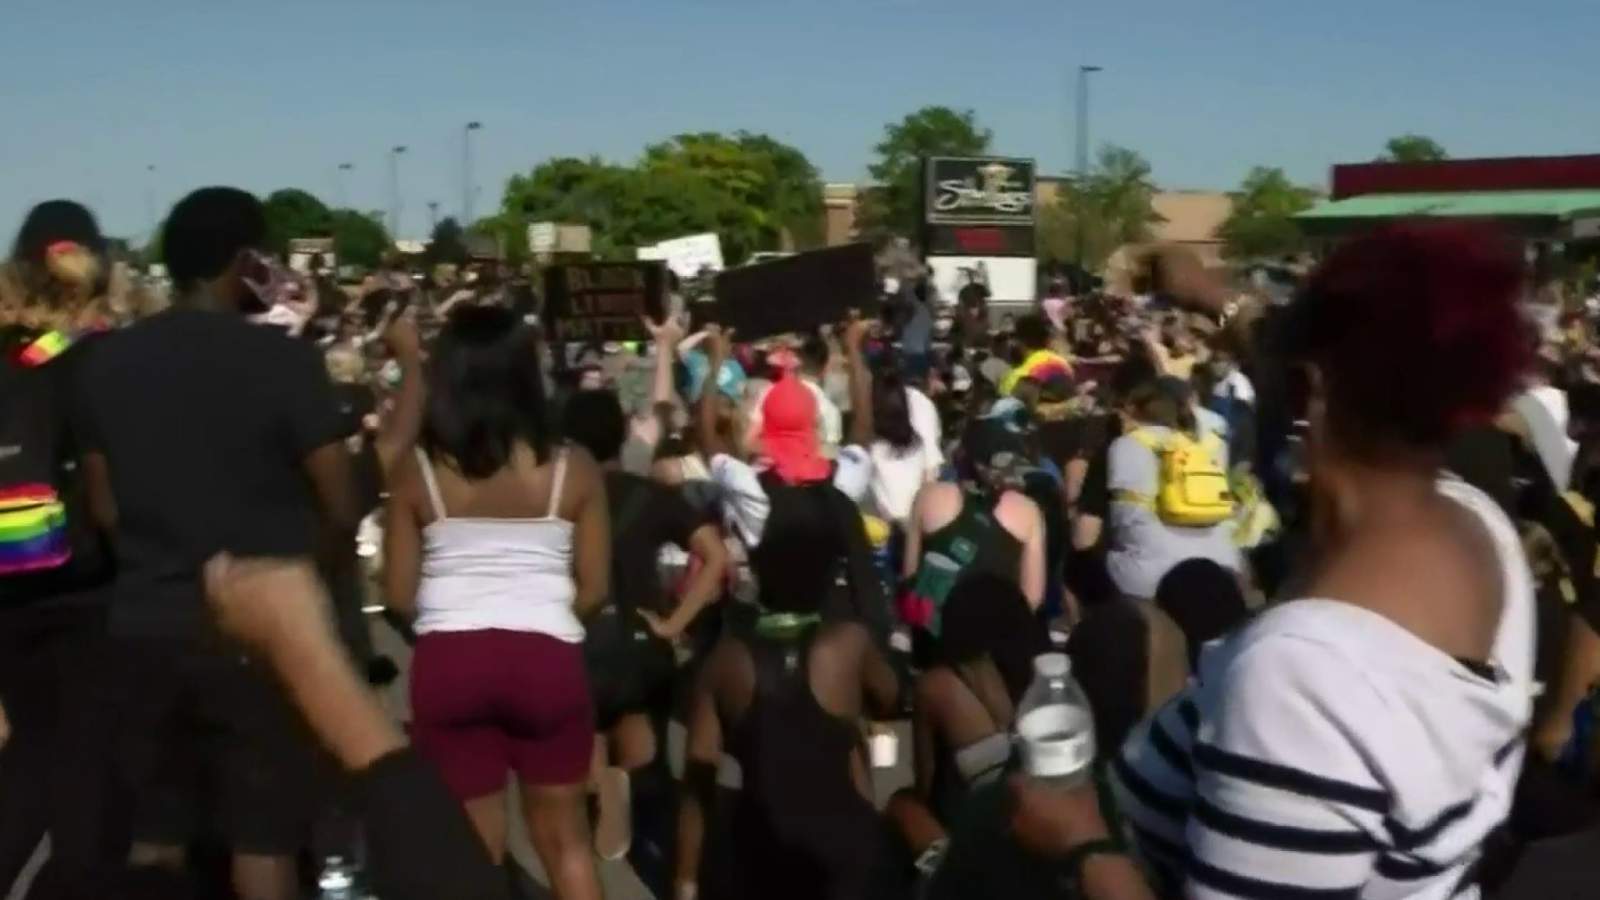 Protesters shut down Hall Road for hours in Sterling Heights